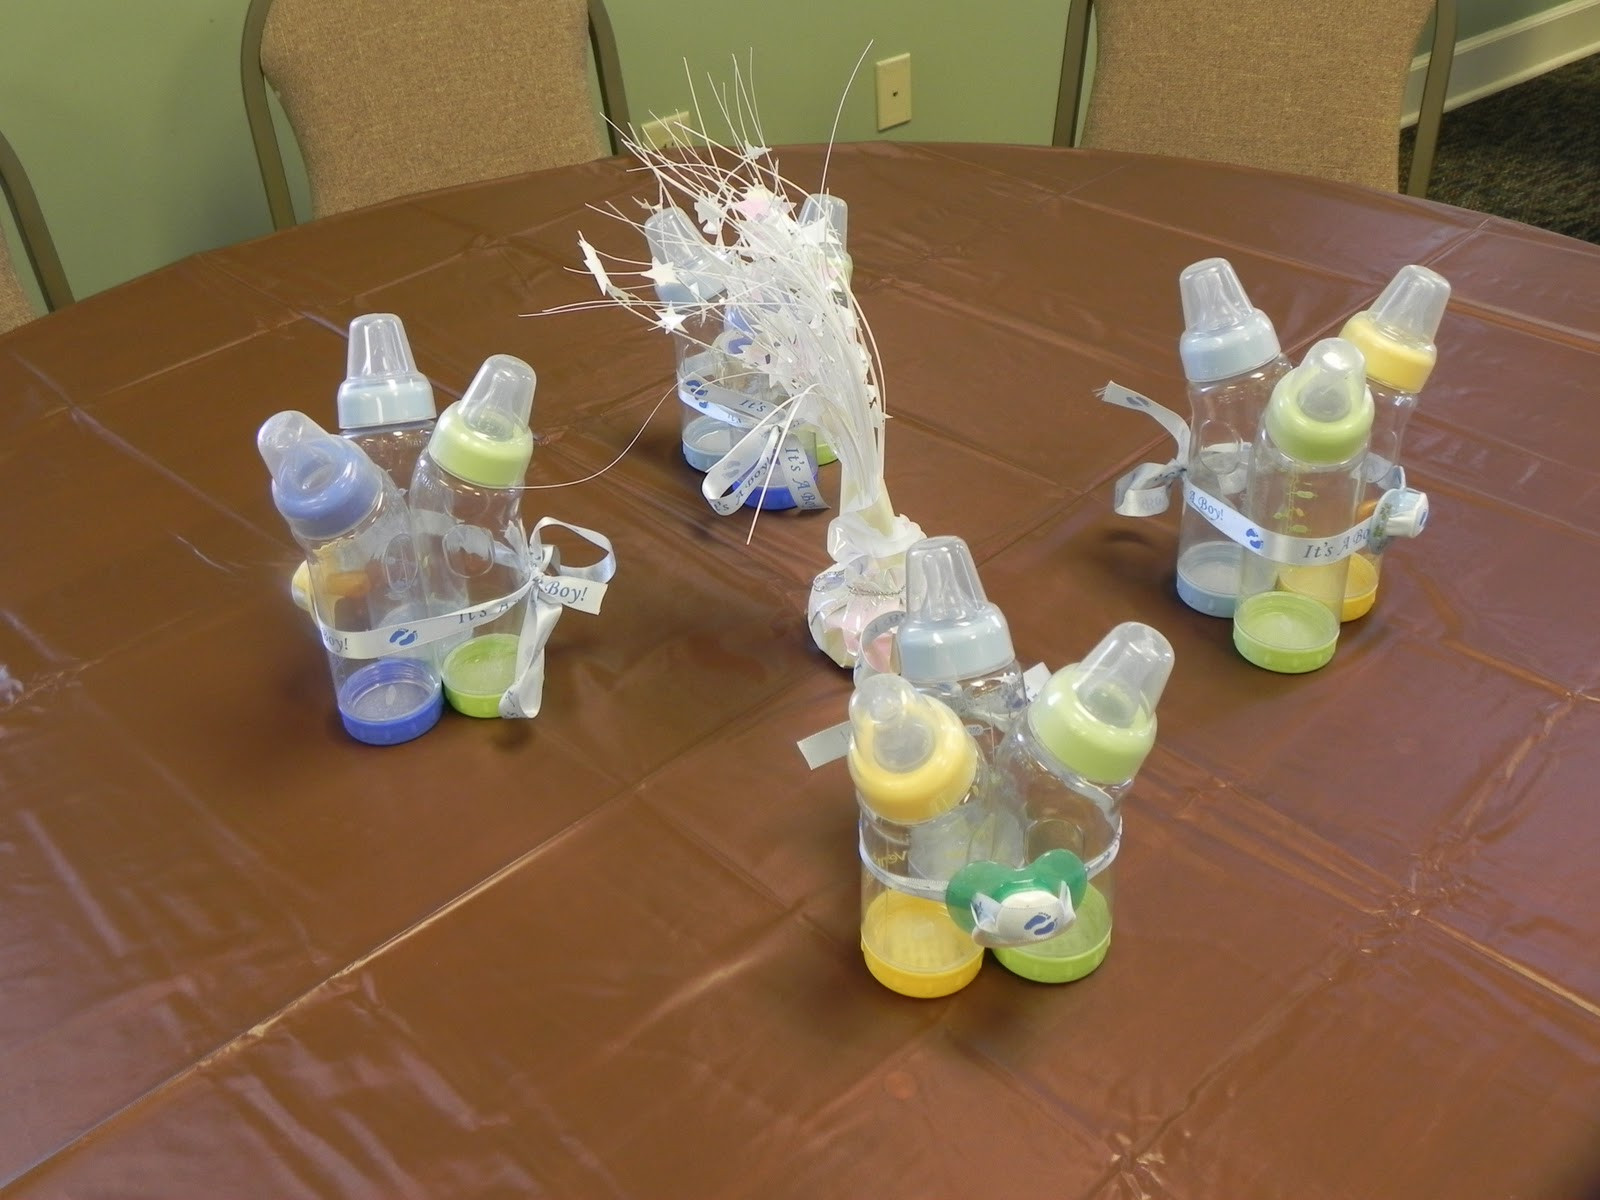 Baby Shower Table Decor
 LIFES LITTLE GARDEN Decorations For The Baby Shower